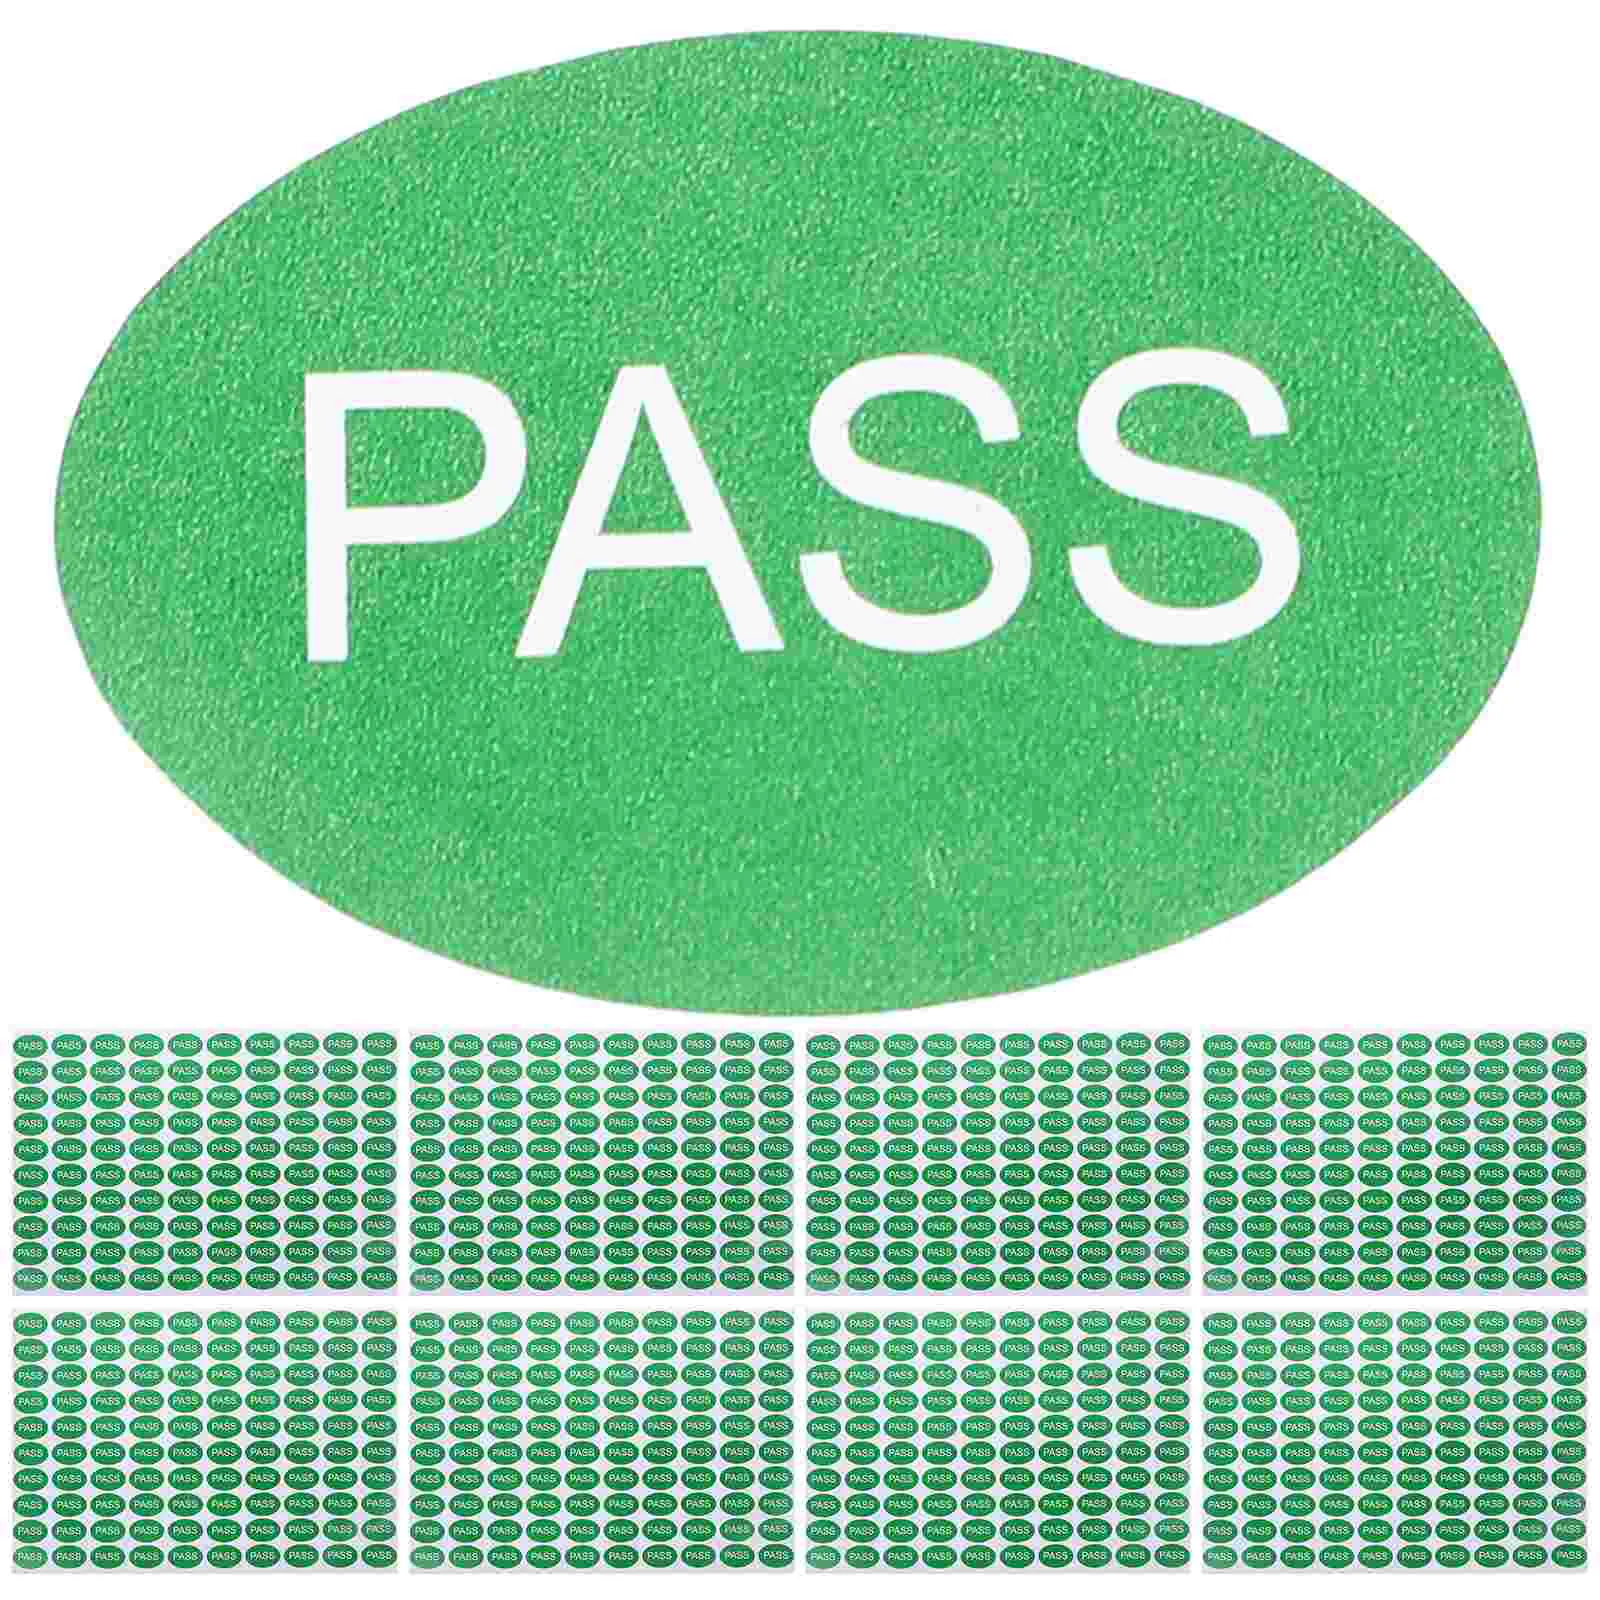 

2000Pcs Multi-function Warehouse Tags Passed Stickers QC Passed Labels Adhesive Passed Labels Stickers